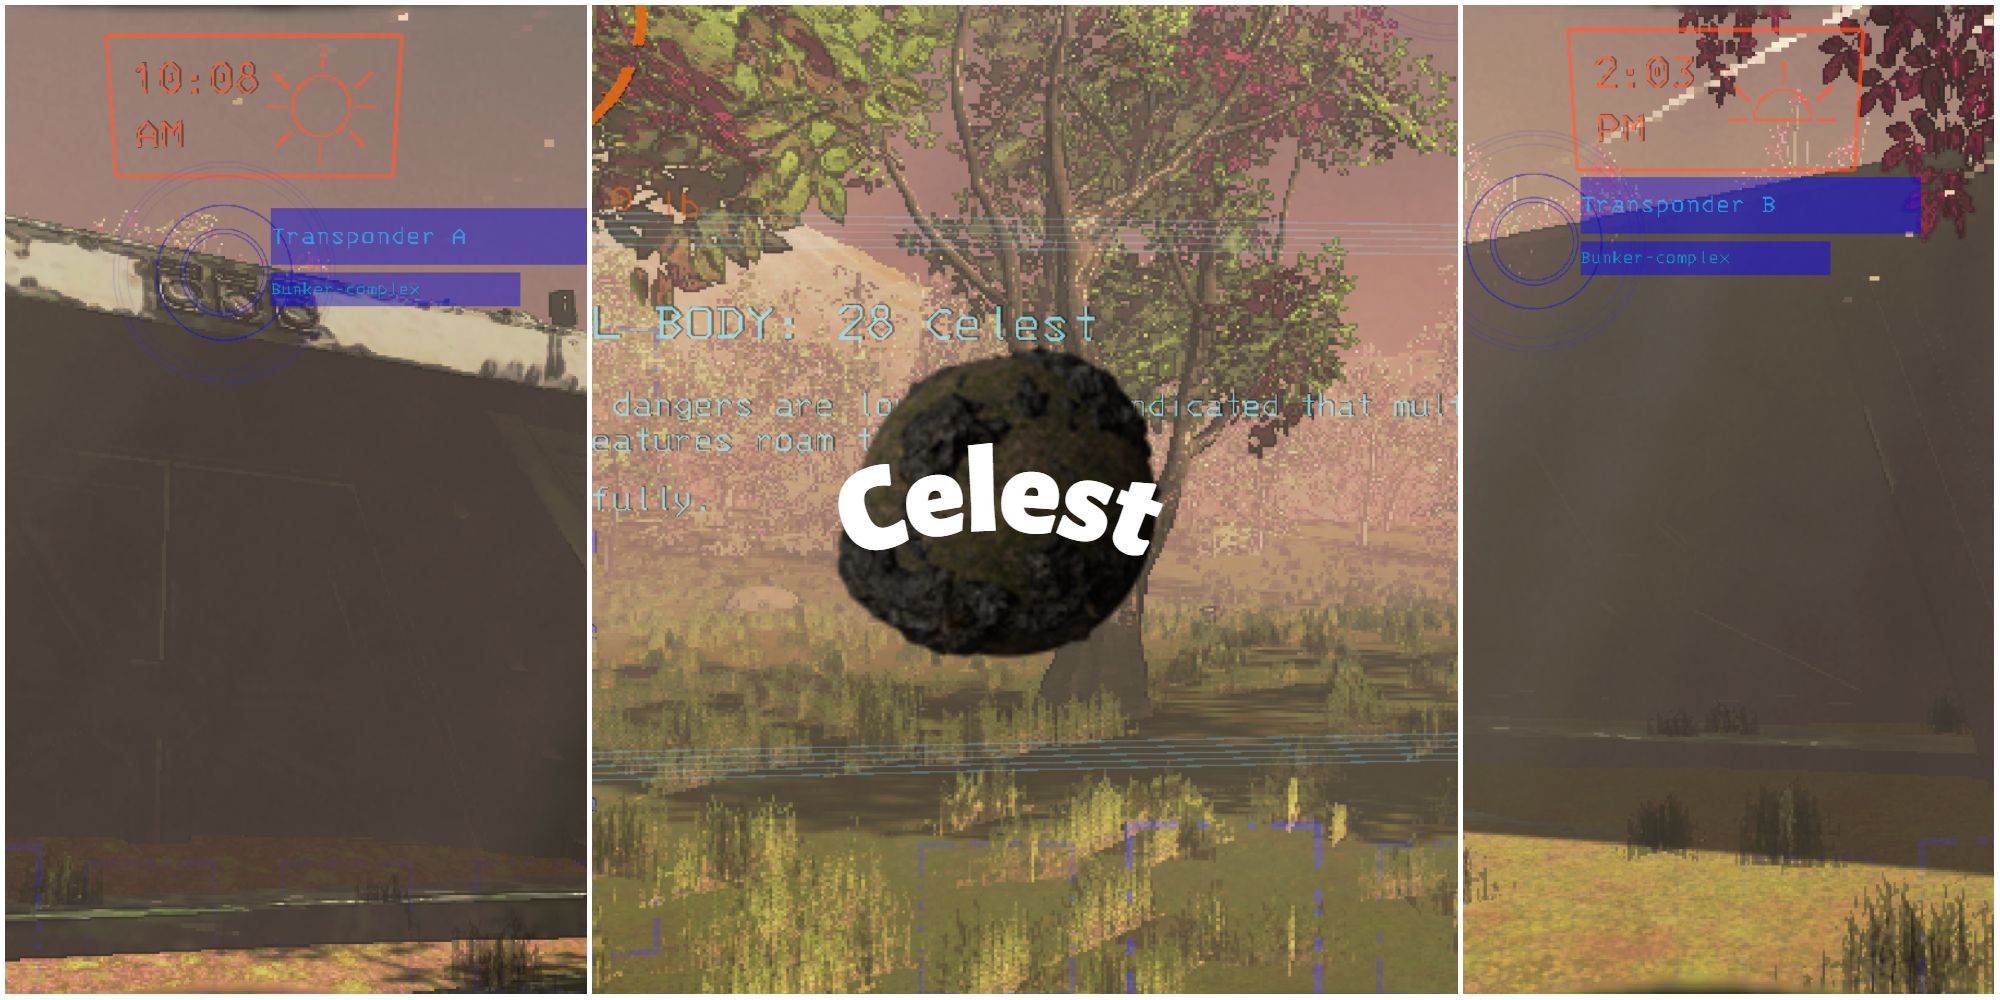 Screenshots from a modded moon called Celest which features an abandoned bunker in a field